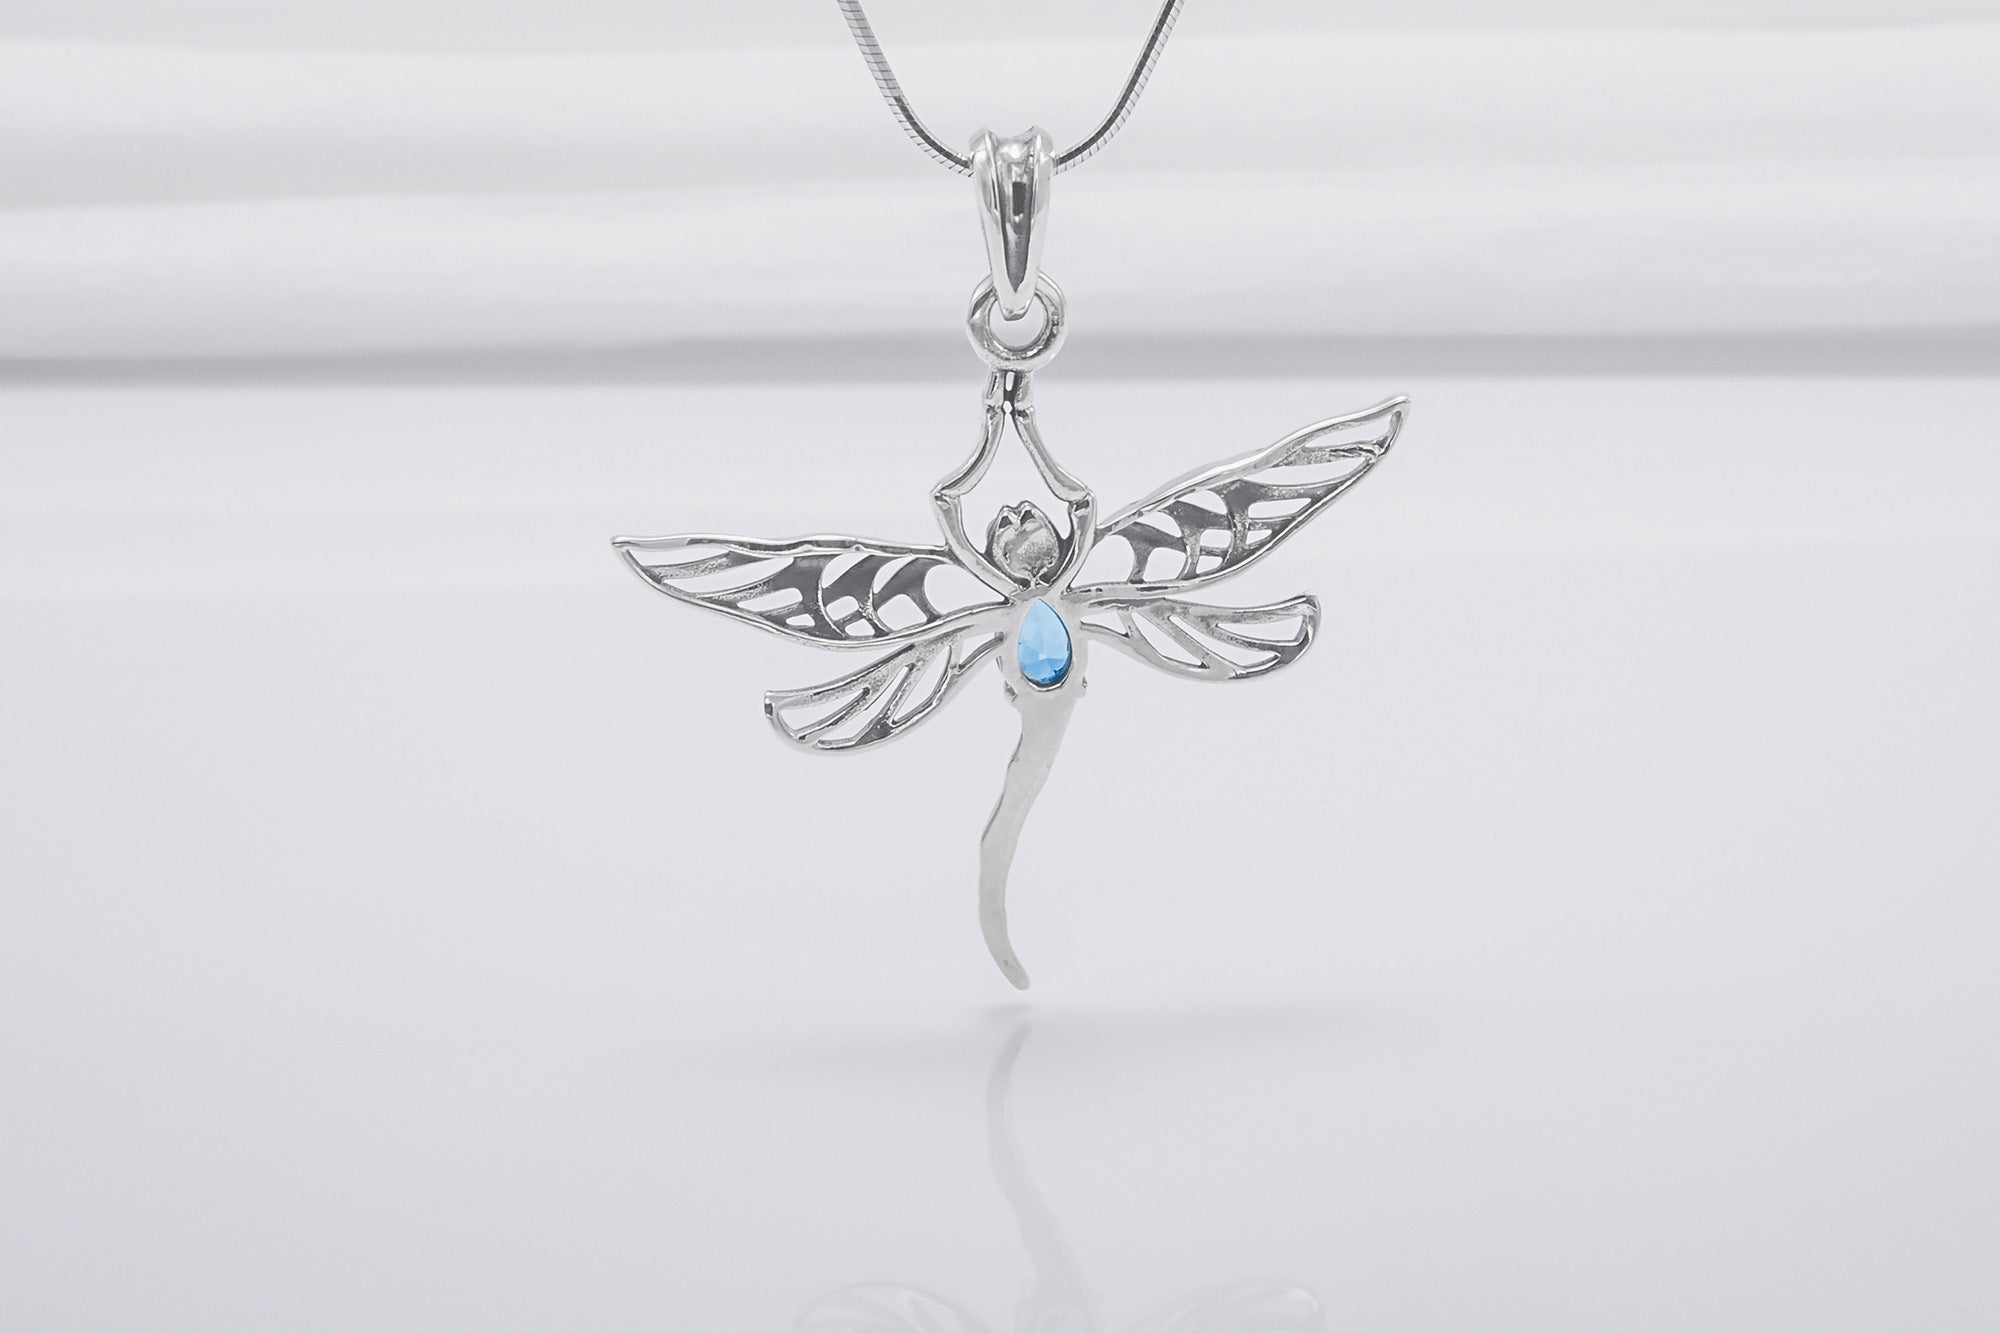 Minimalistic 925 Silver Dragonfly Pendant With Blue Gem, Handcrafted Jewelry - vikingworkshop